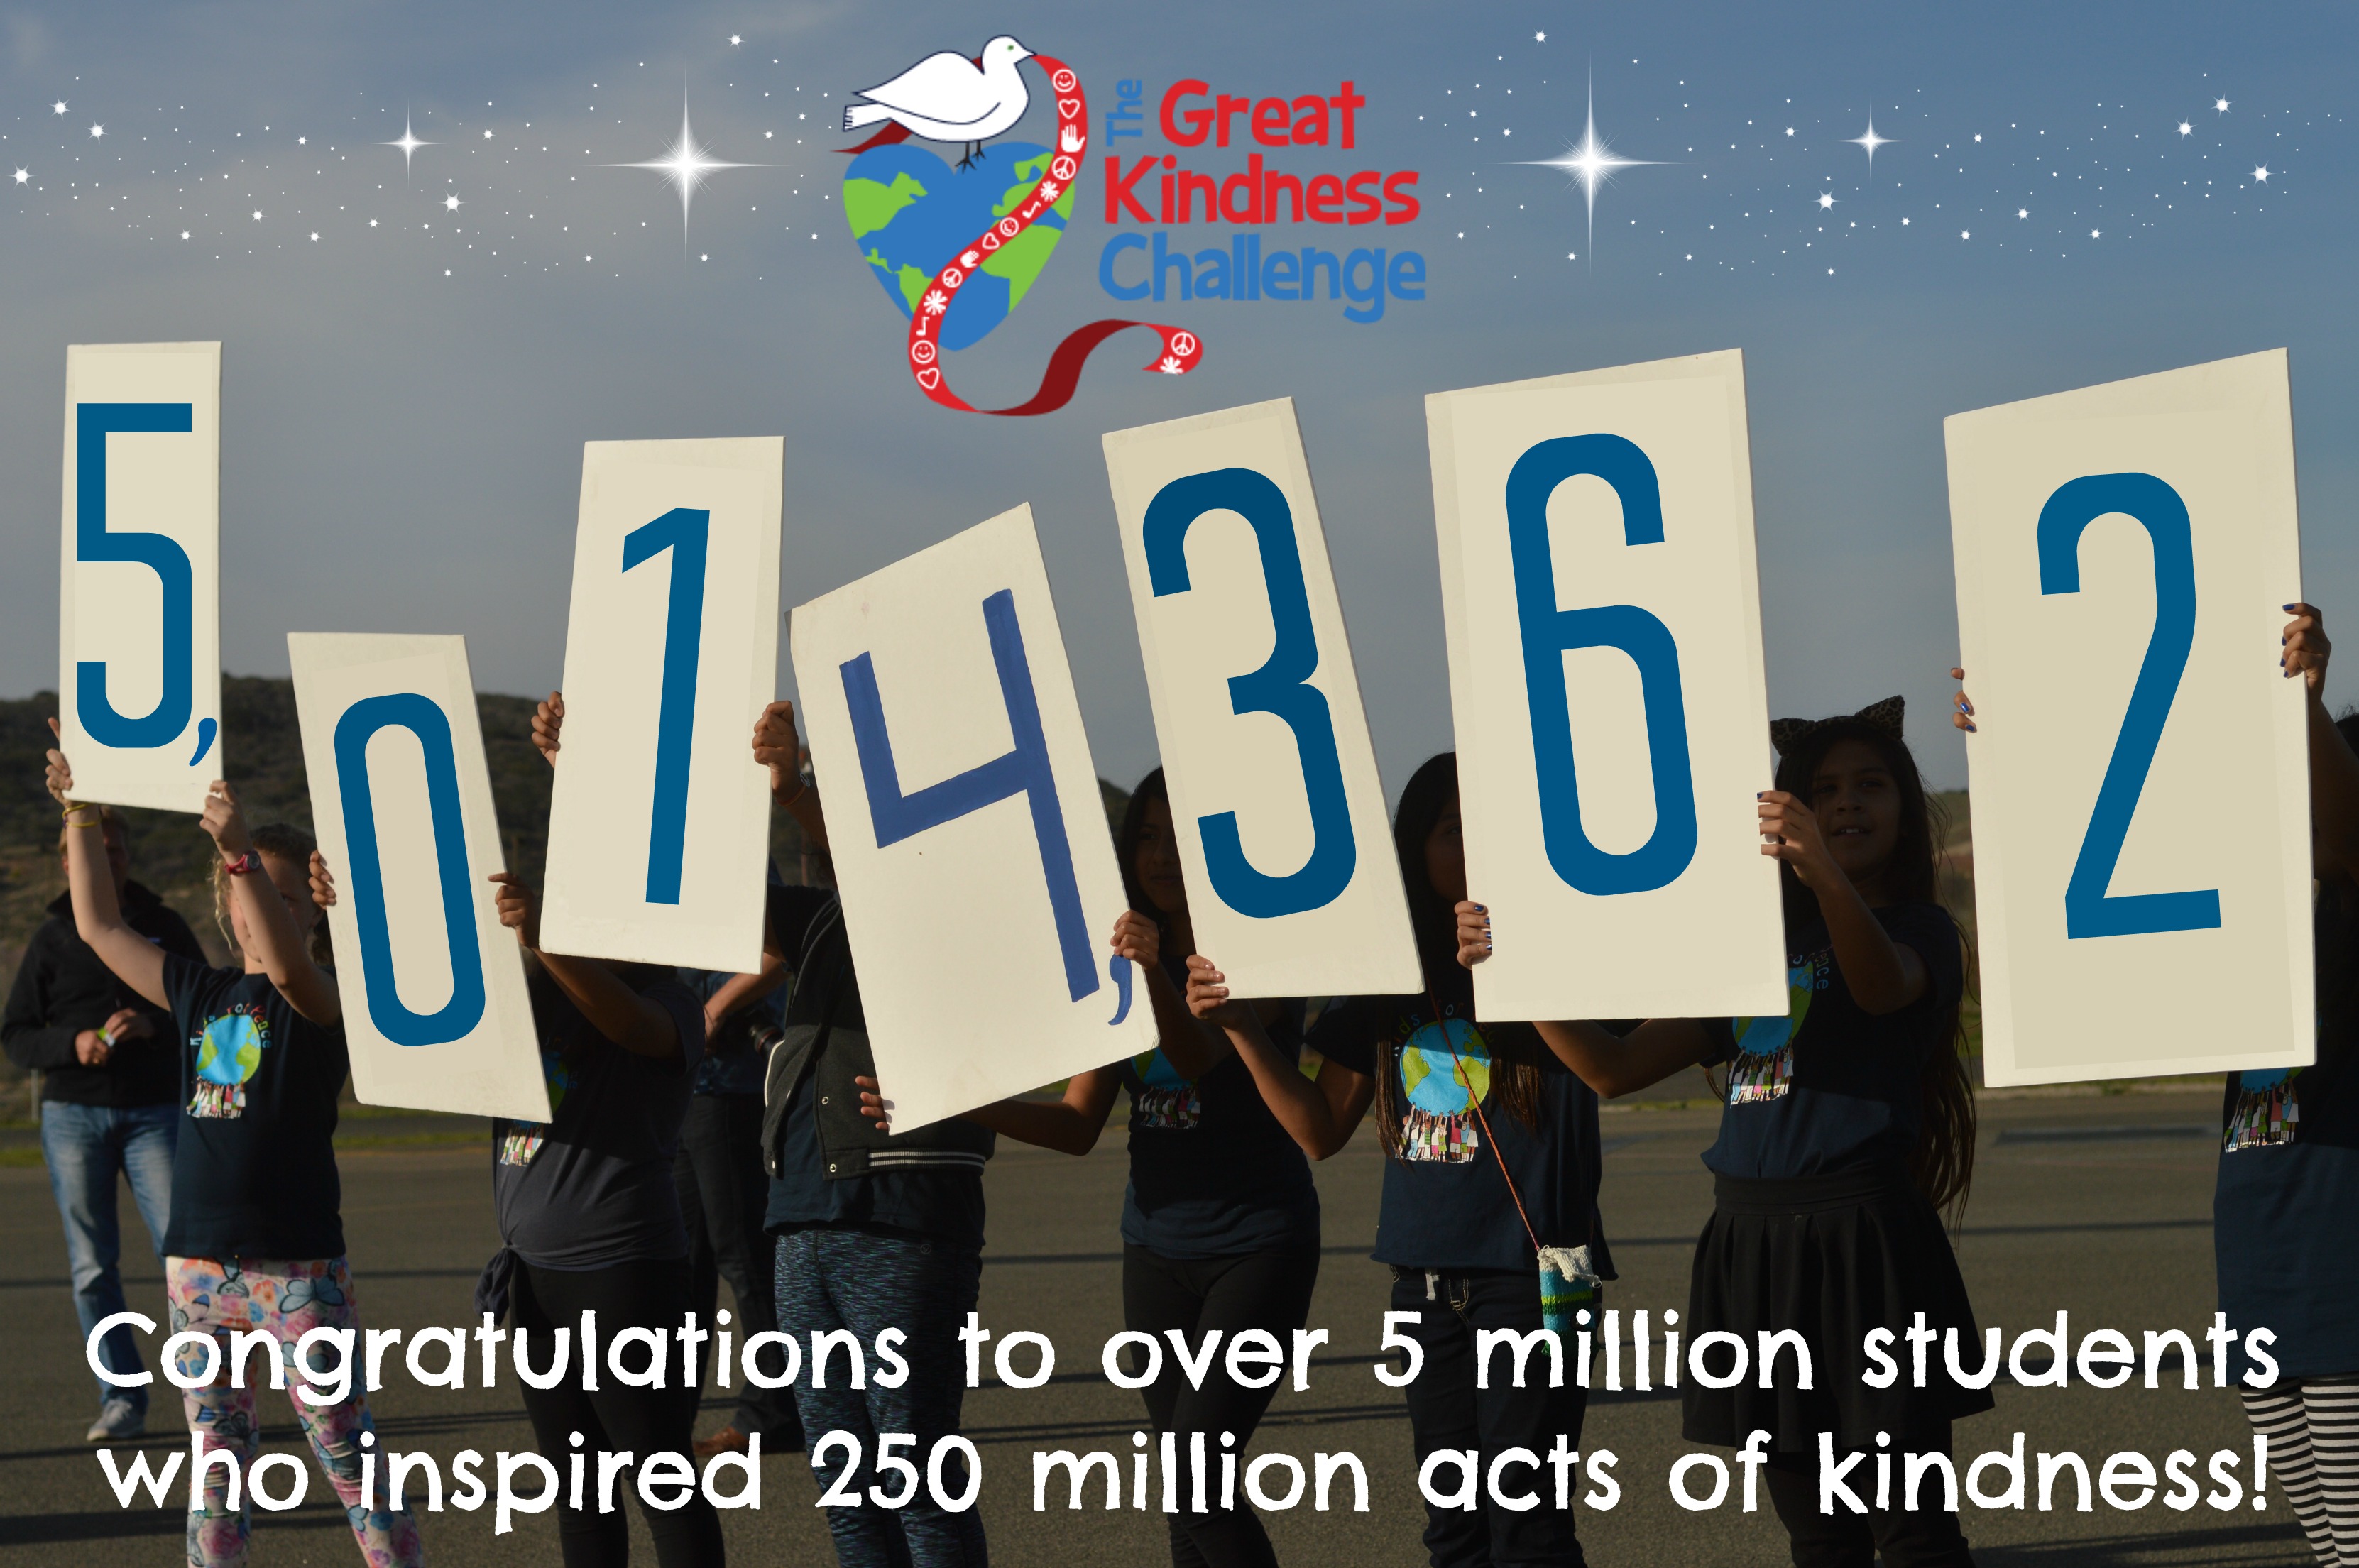 Over 5 million students accepted the challenge!